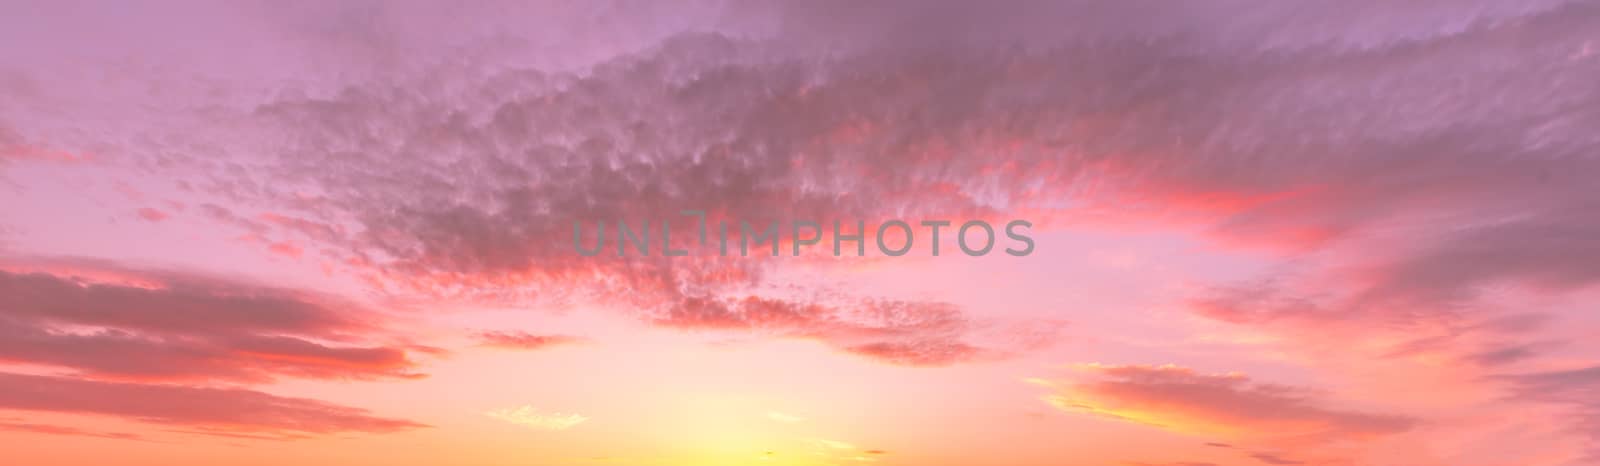 Cloudy sky at sunset or sunrise with sunlight. Abstract backdrop for design.